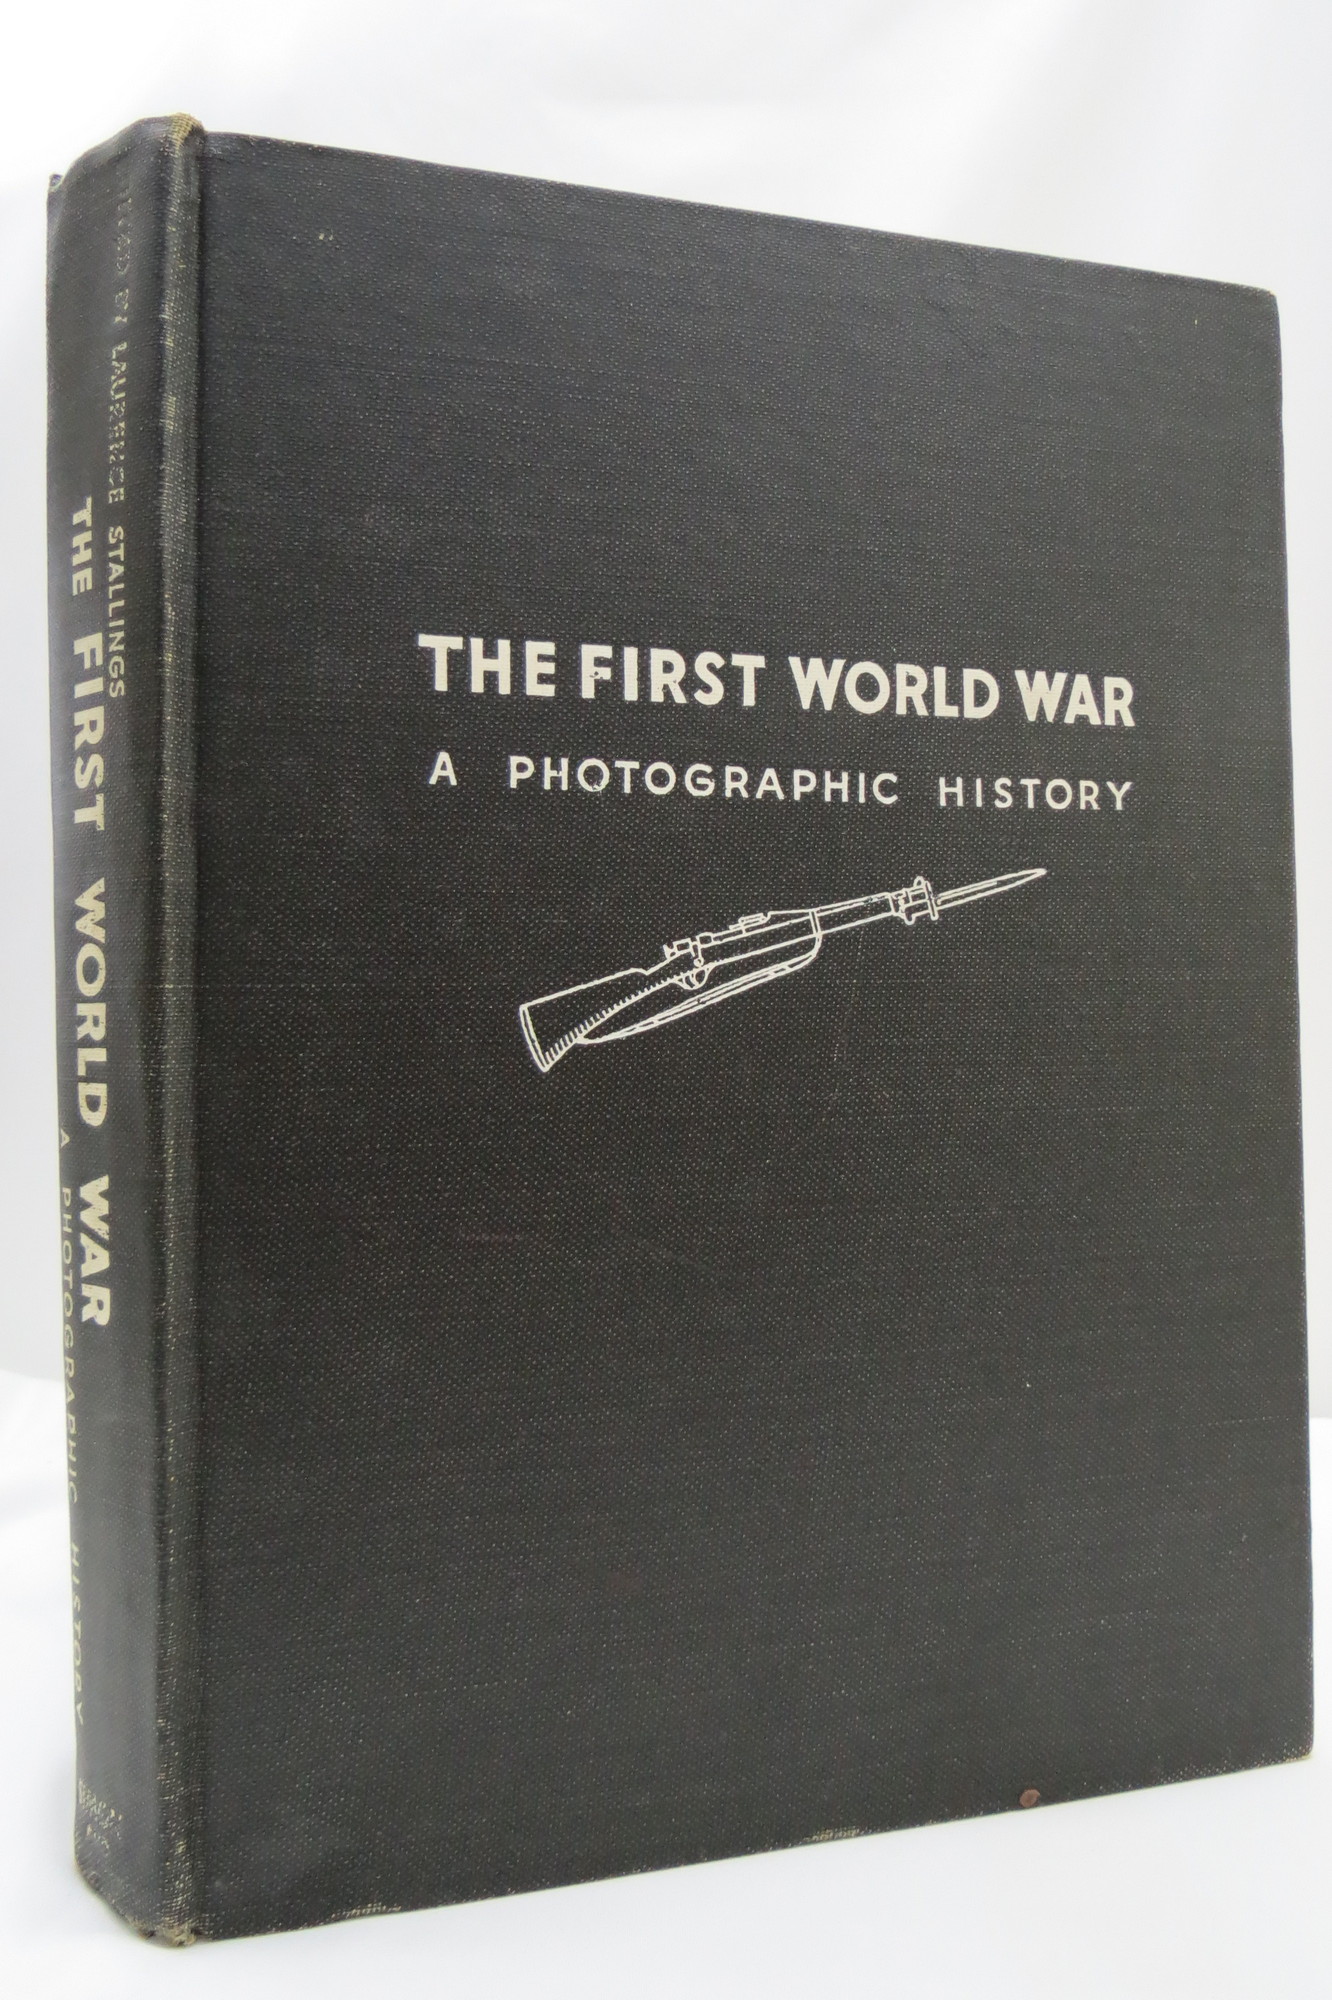 Image for THE FIRST WORLD WAR. A PHOTOGRAPHIC HISTORY. EDITED WITH CAPTIONS AND AN INTRODUCTION BY LAURENCE STALLINGS.